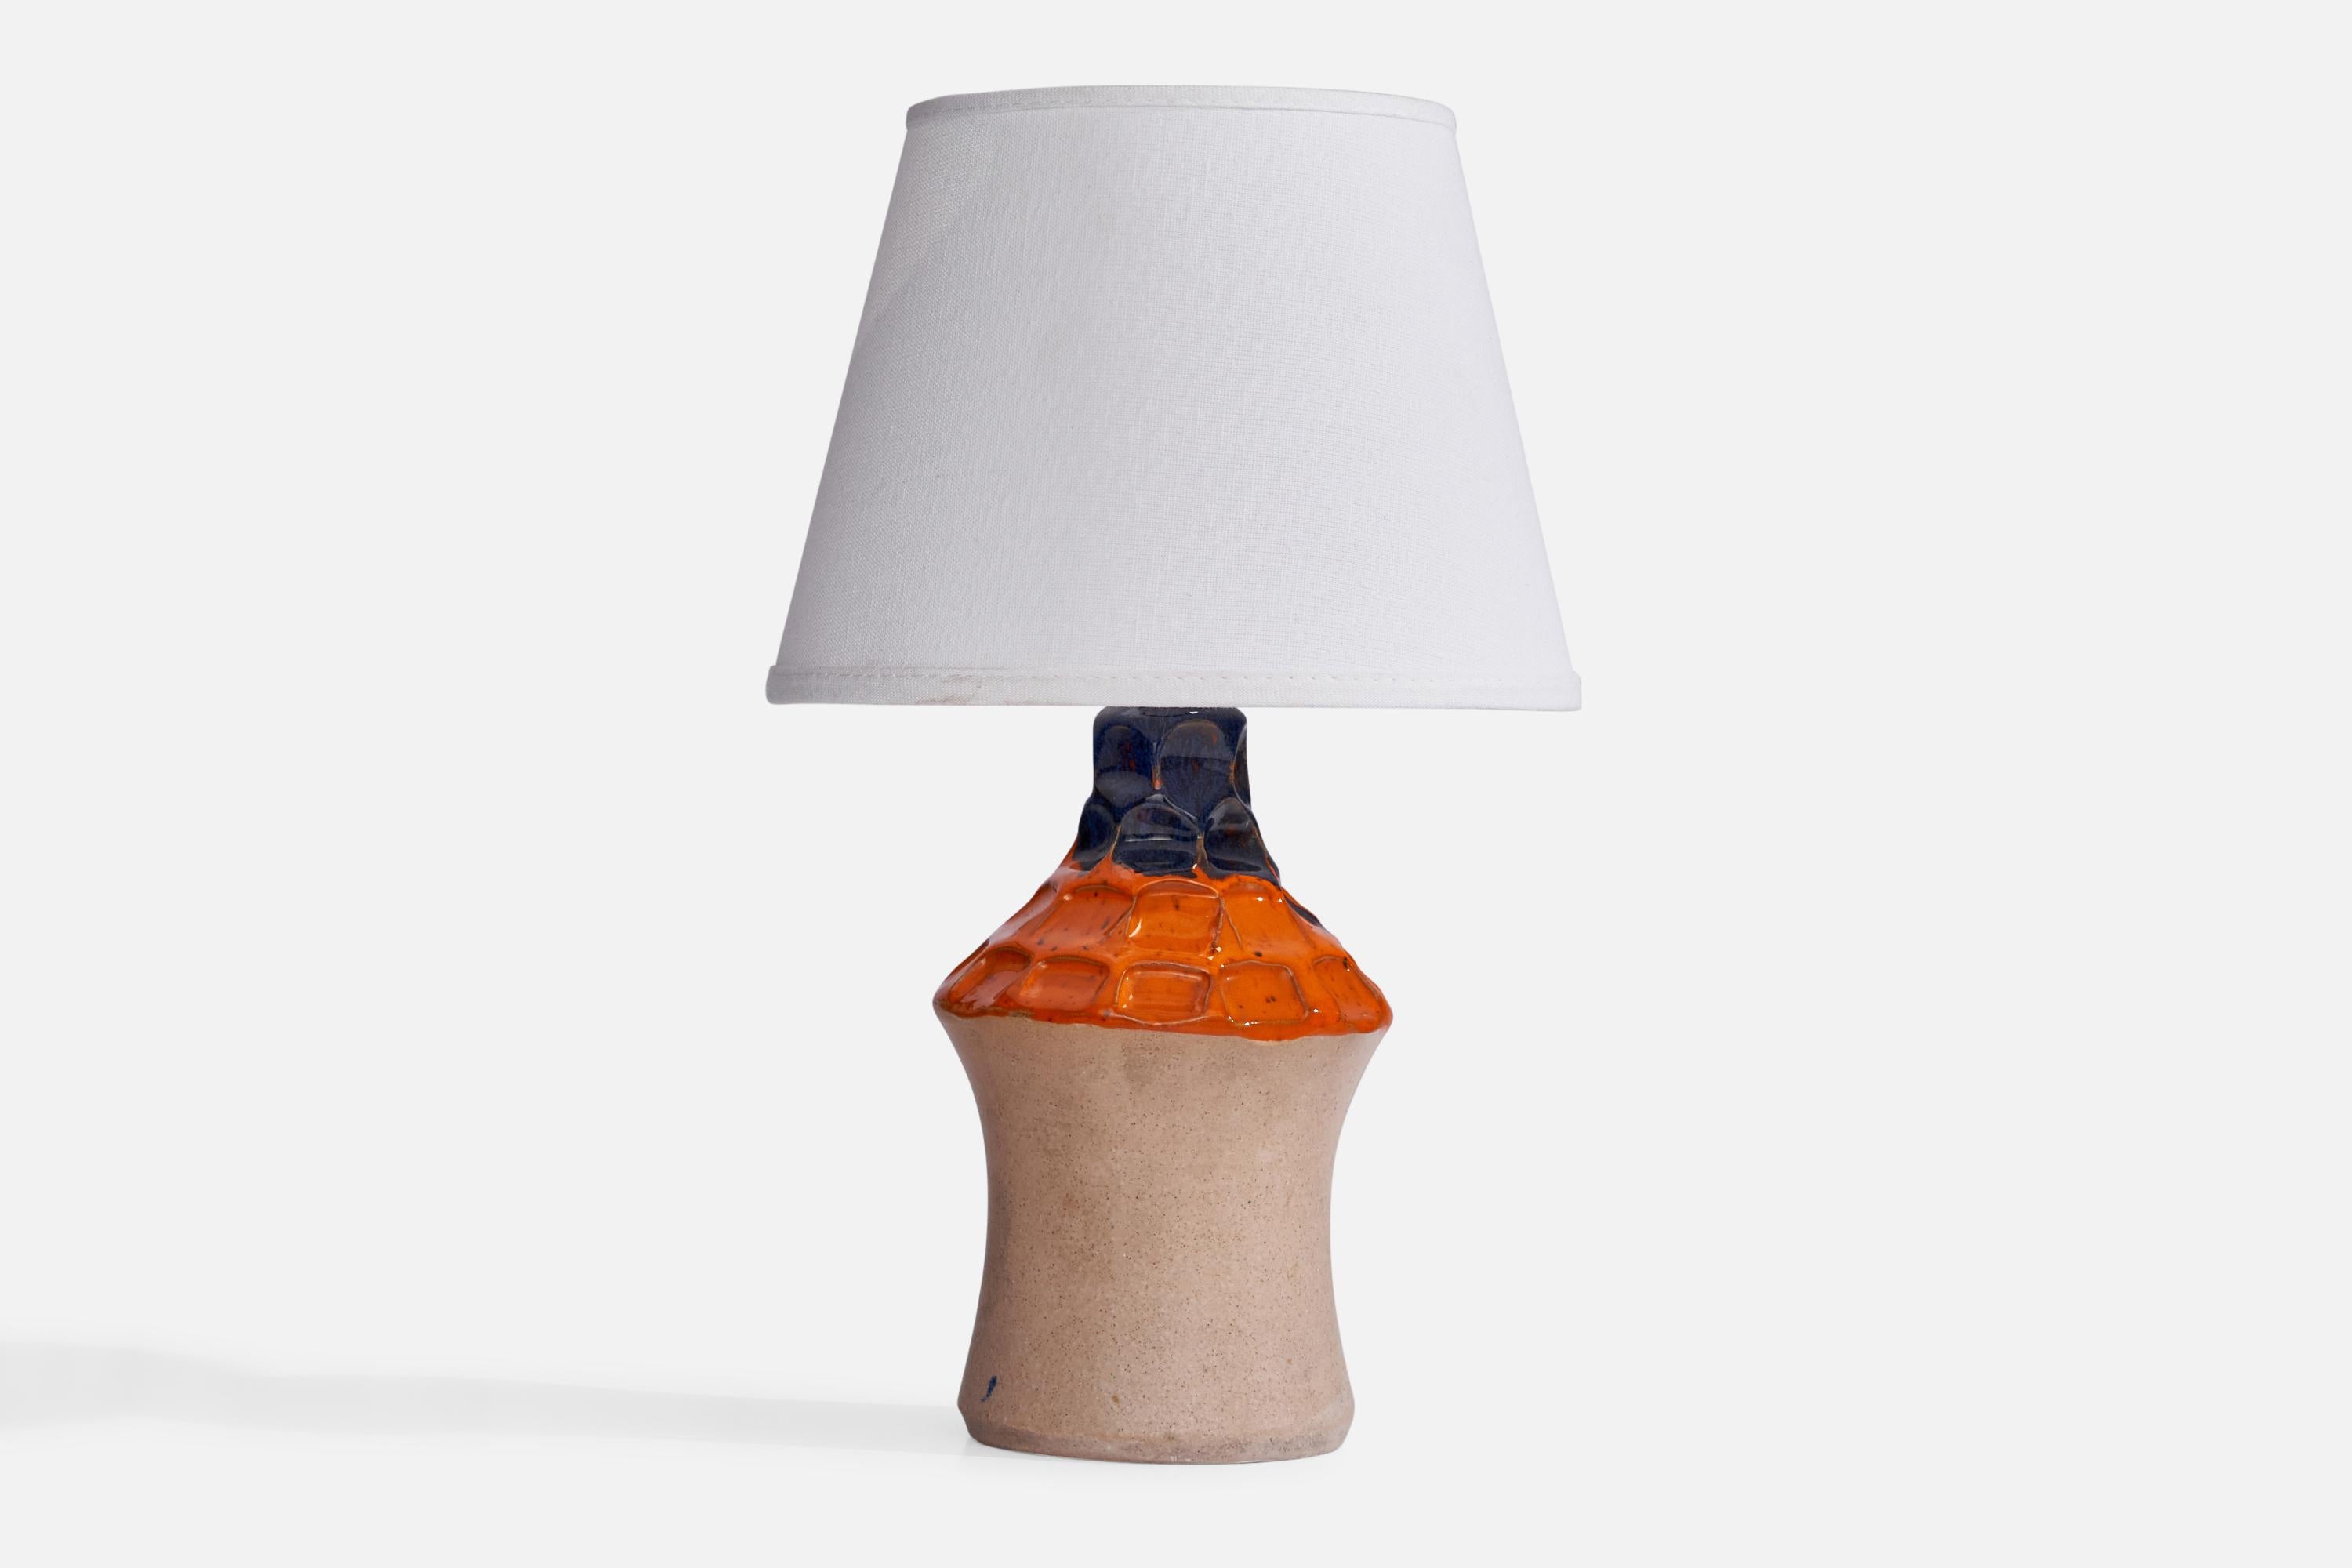 An orange and blue semi-glazed ceramic table lamp designed and produced in Sweden, 1960s.

Dimensions of Lamp (inches): 9.65” H x 4.5” Diameter
Dimensions of Shade (inches): 5.25” Top Diameter x 8” Bottom Diameter x 6” H
Dimensions of Lamp with